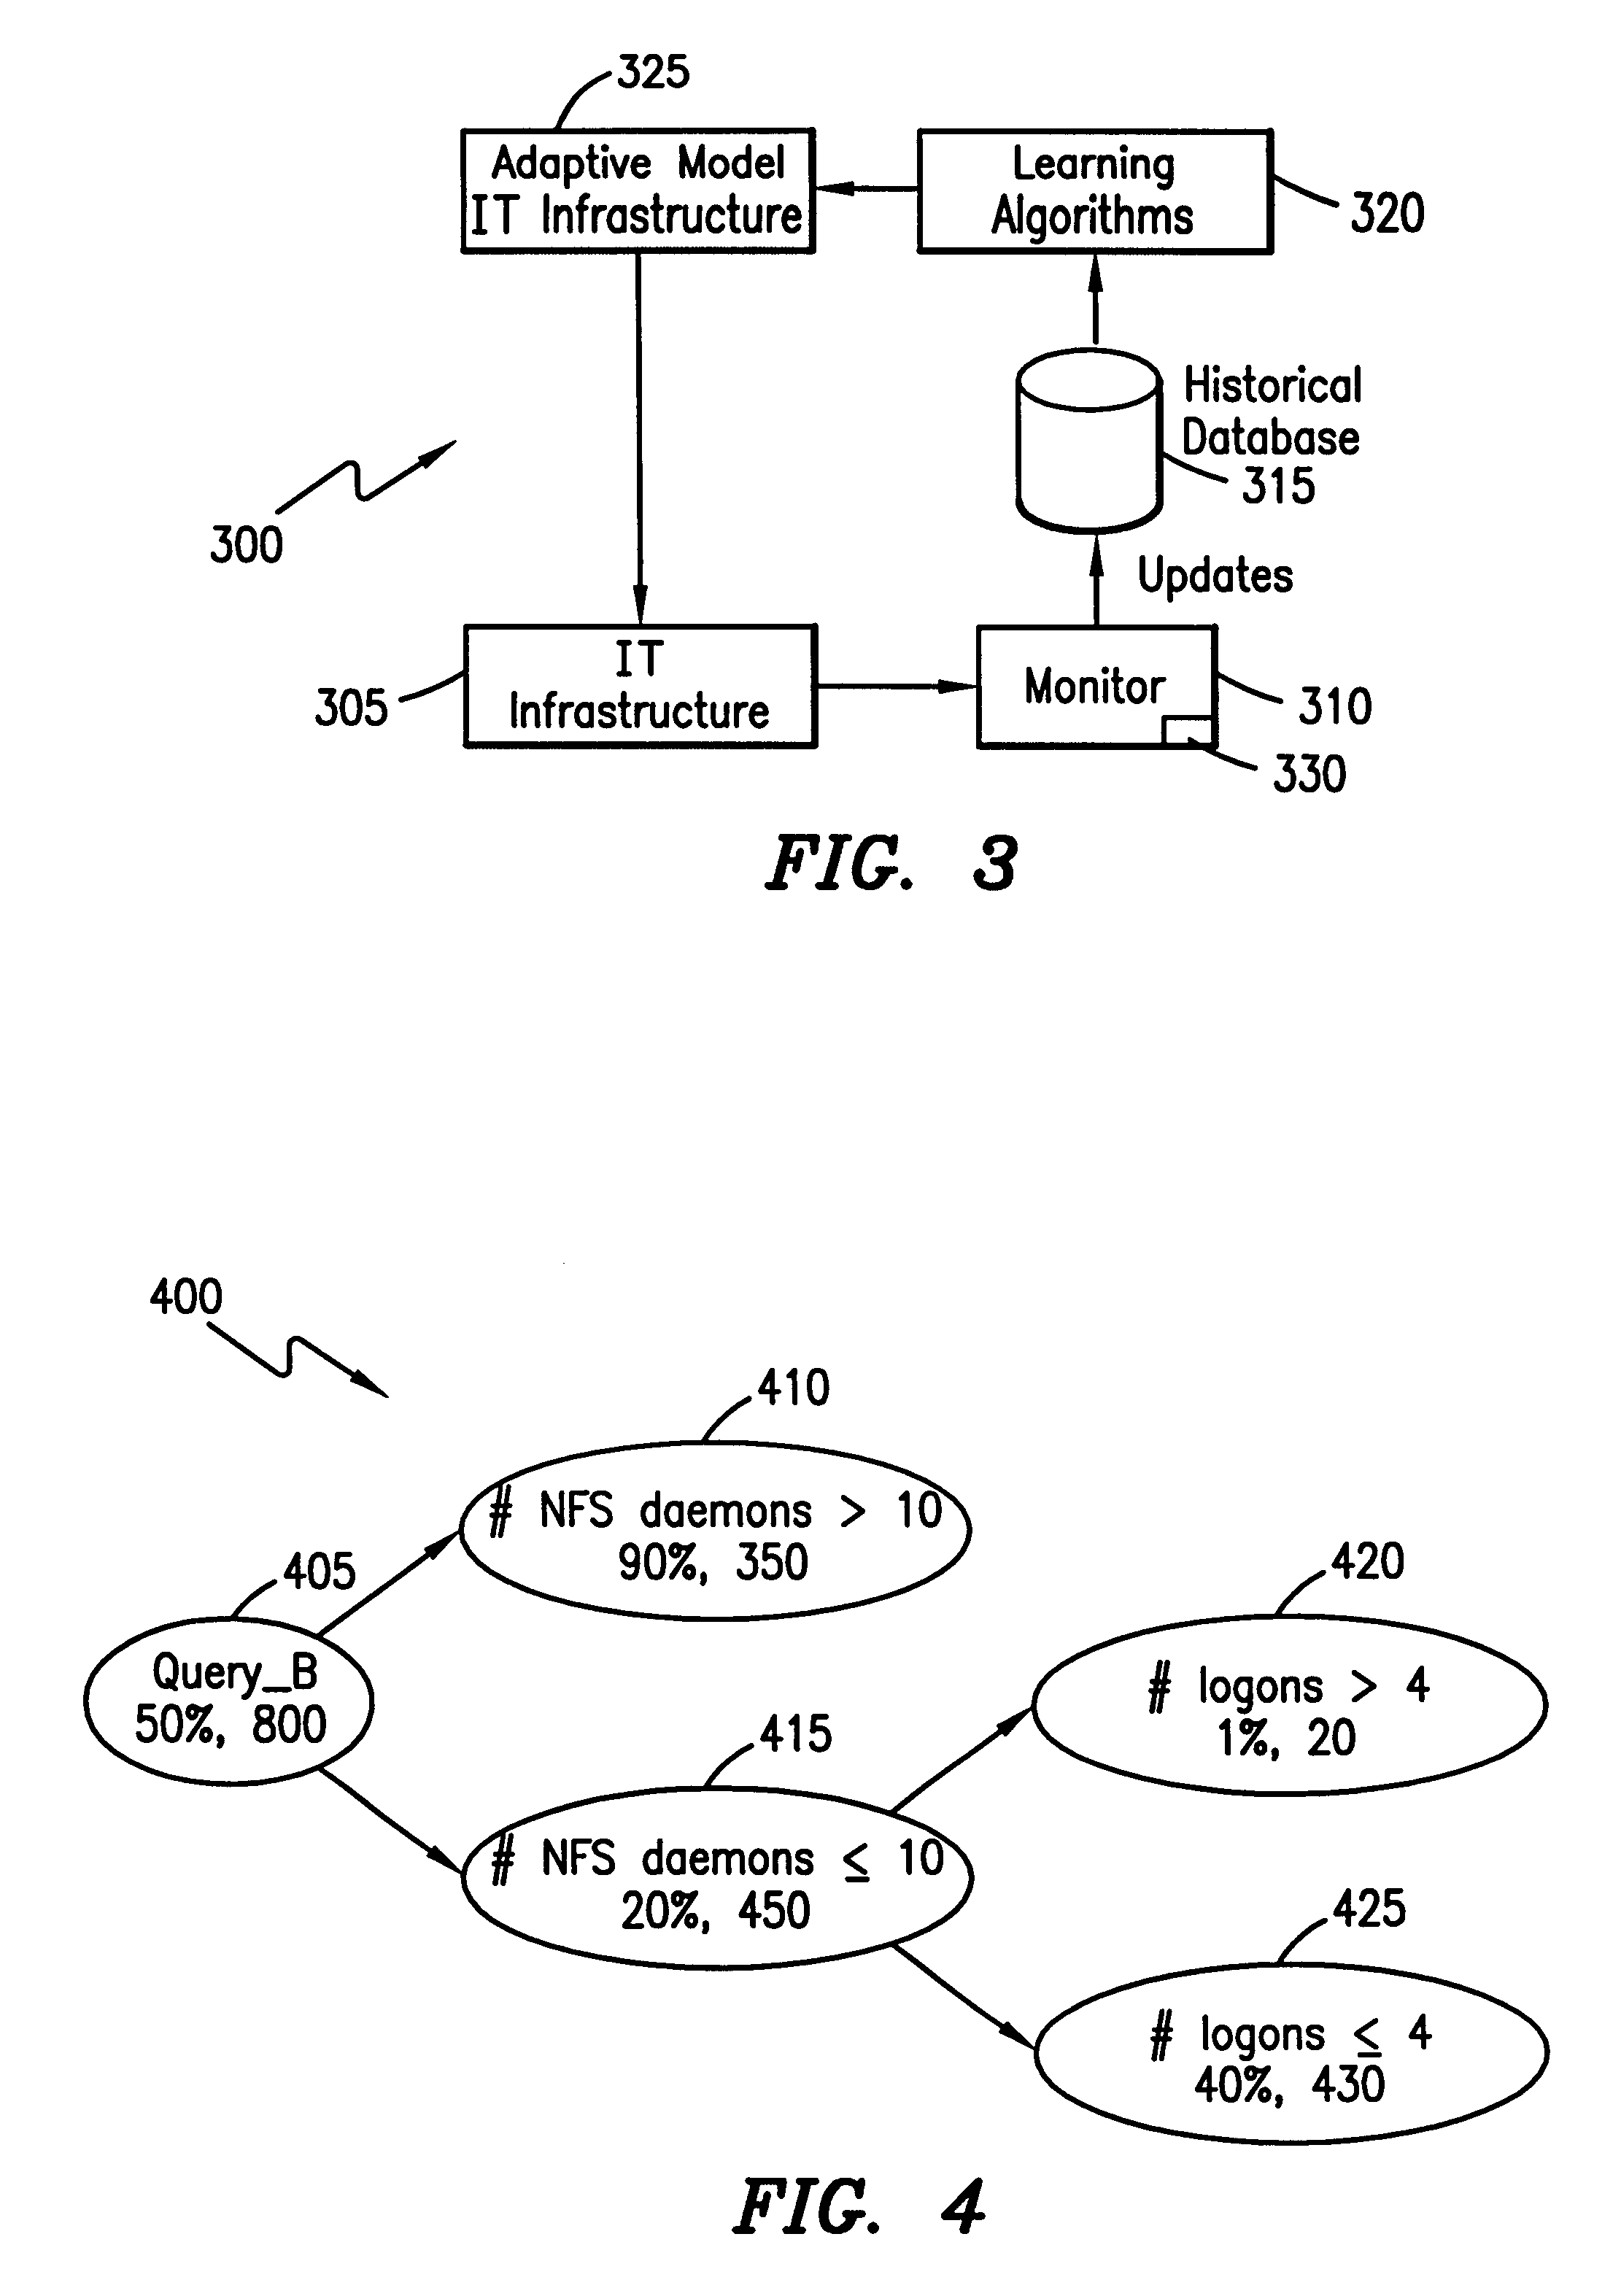 System and method for generating performance models of complex information technology systems